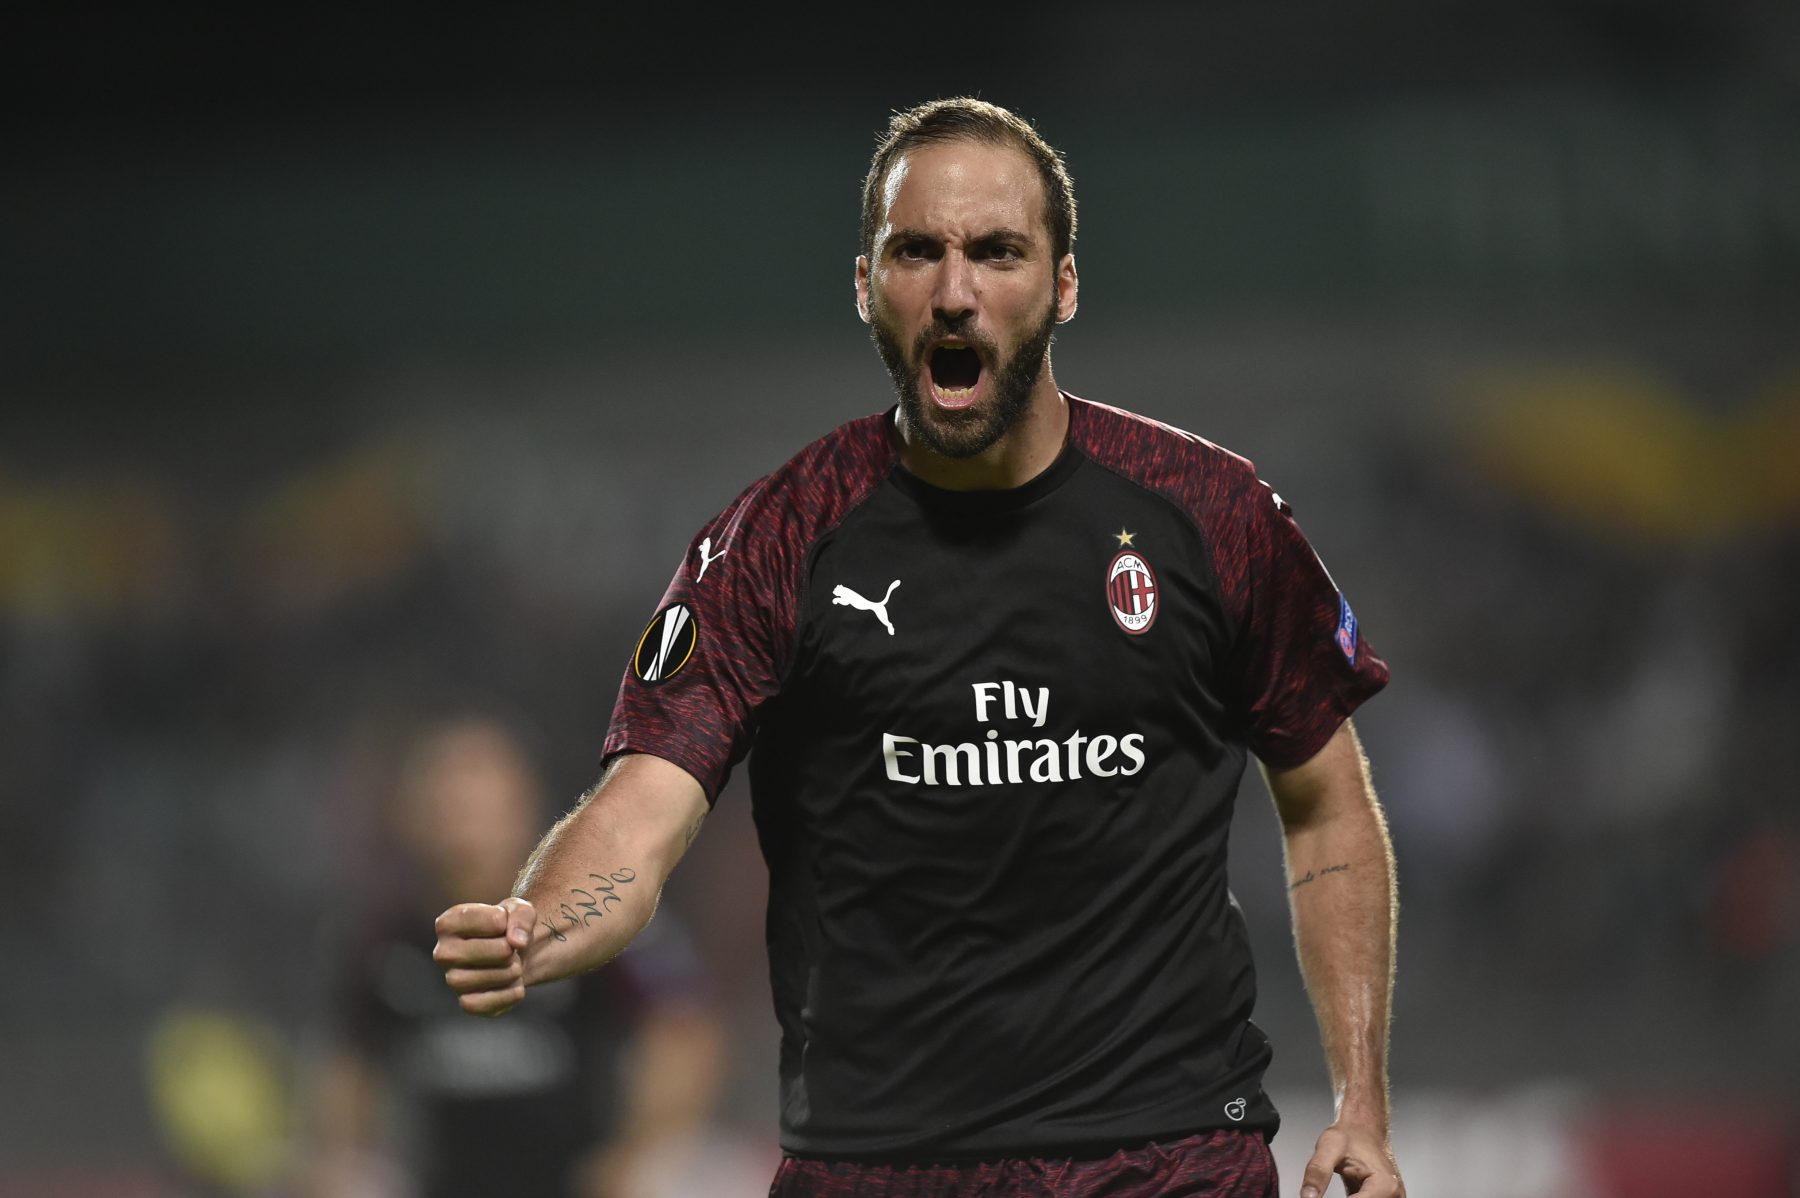 AC Milan's Argentinian forward Gonzalo Higuain celebrates after scoring a goal during the UEFA Europa League Group F football match between F91 Dudelange and AC Milan at the Josy Barthel Stadium in Luxembourg, on September 20, 2018. (Photo by JOHN THYS / AFP) (Photo credit should read JOHN THYS/AFP/Getty Images)